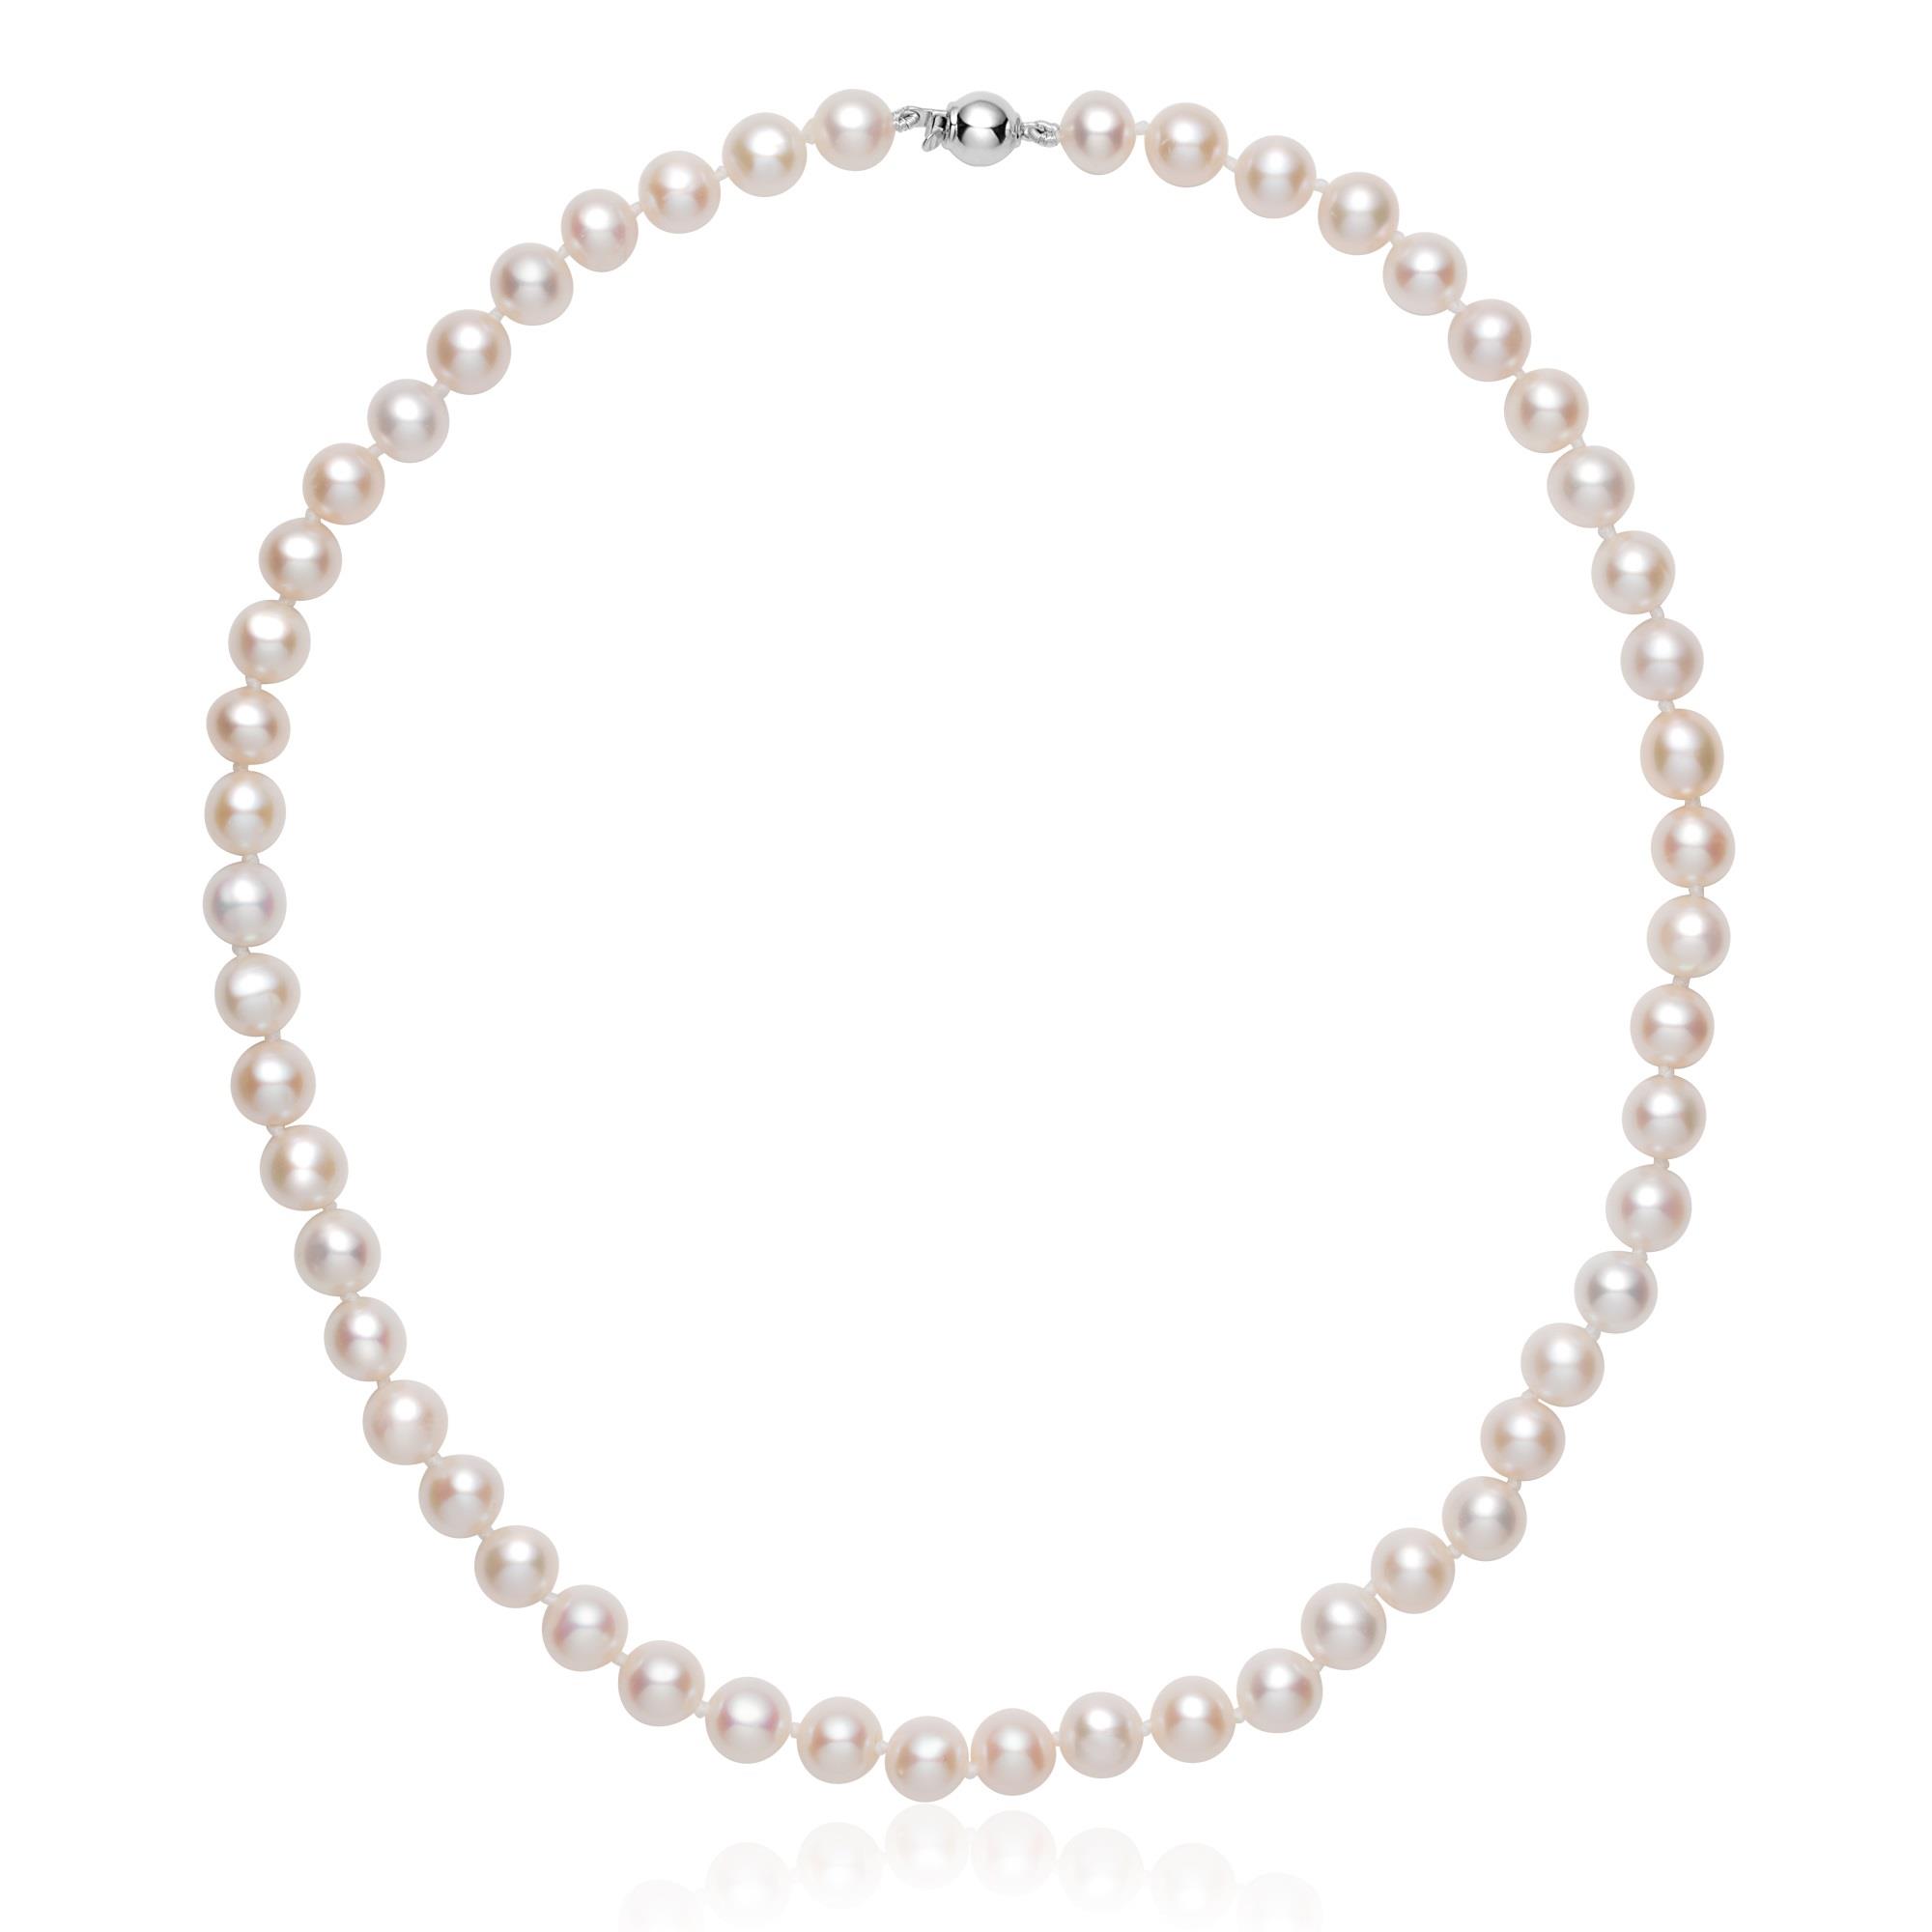 Freshwater Pearl Necklace 7.5-8.0mm | Pravins